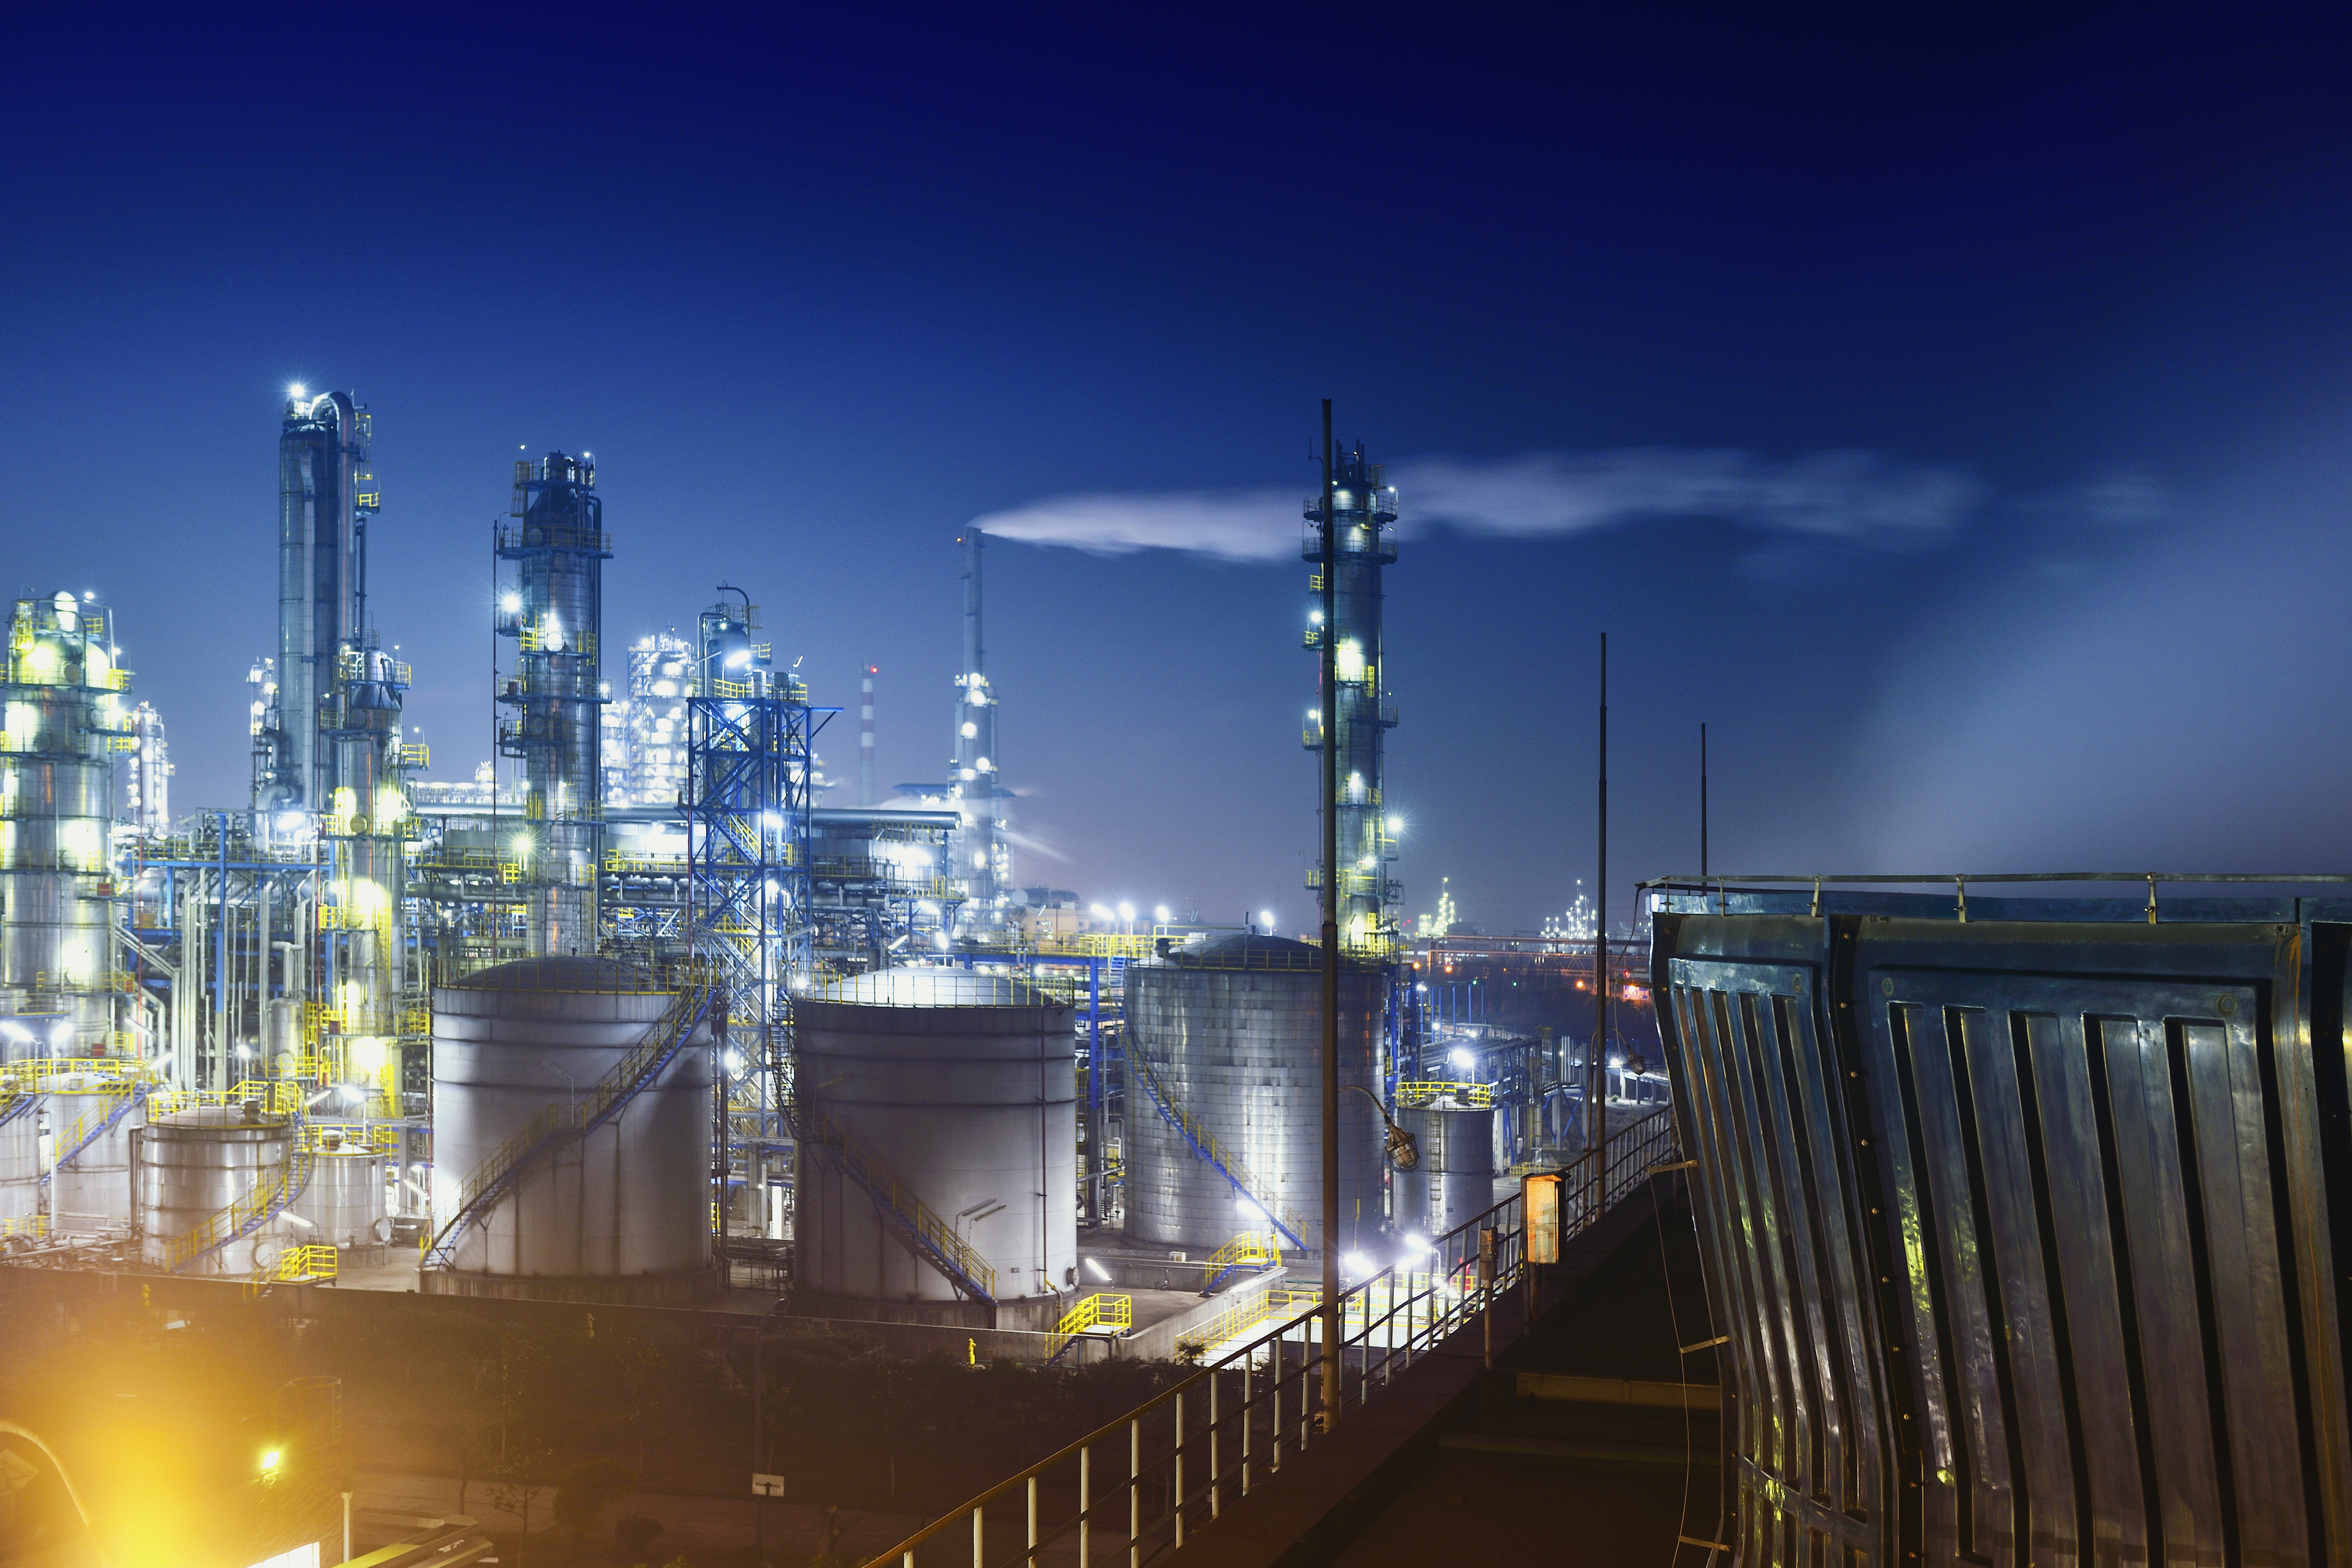 Oil Refinery, Chemical and Petrochemical plants